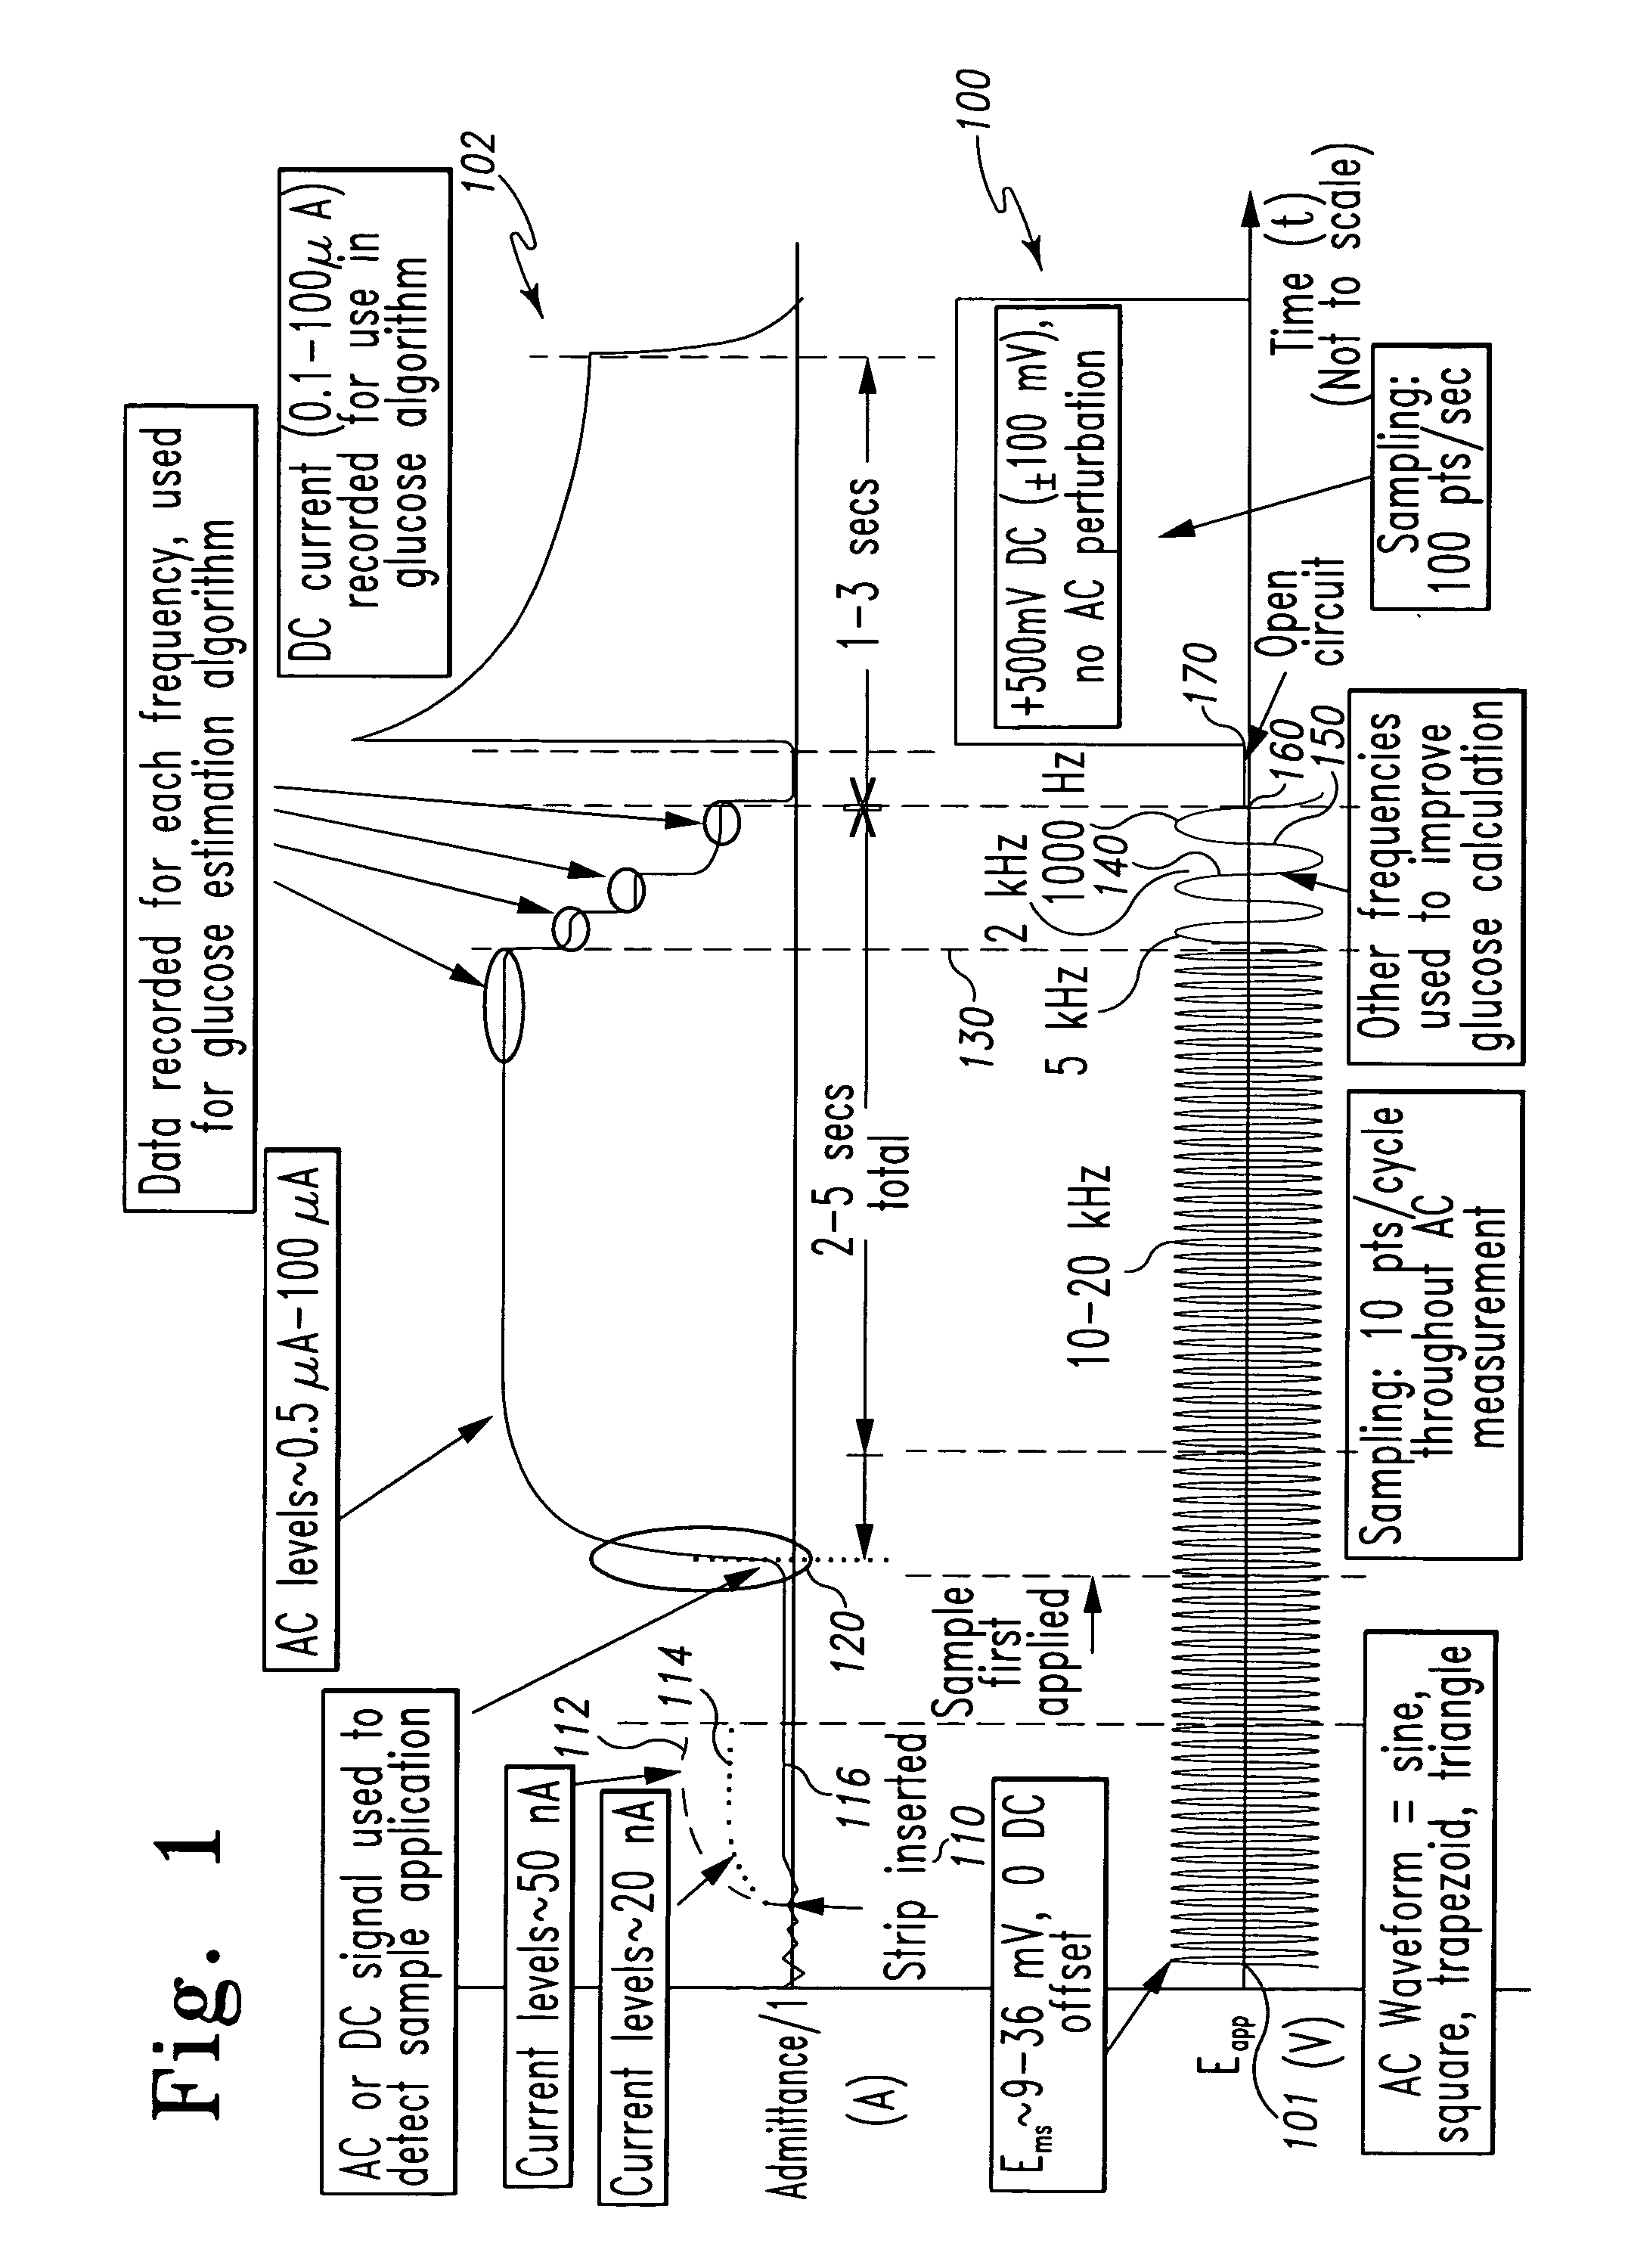 System and method for analyte measurement using AC excitation